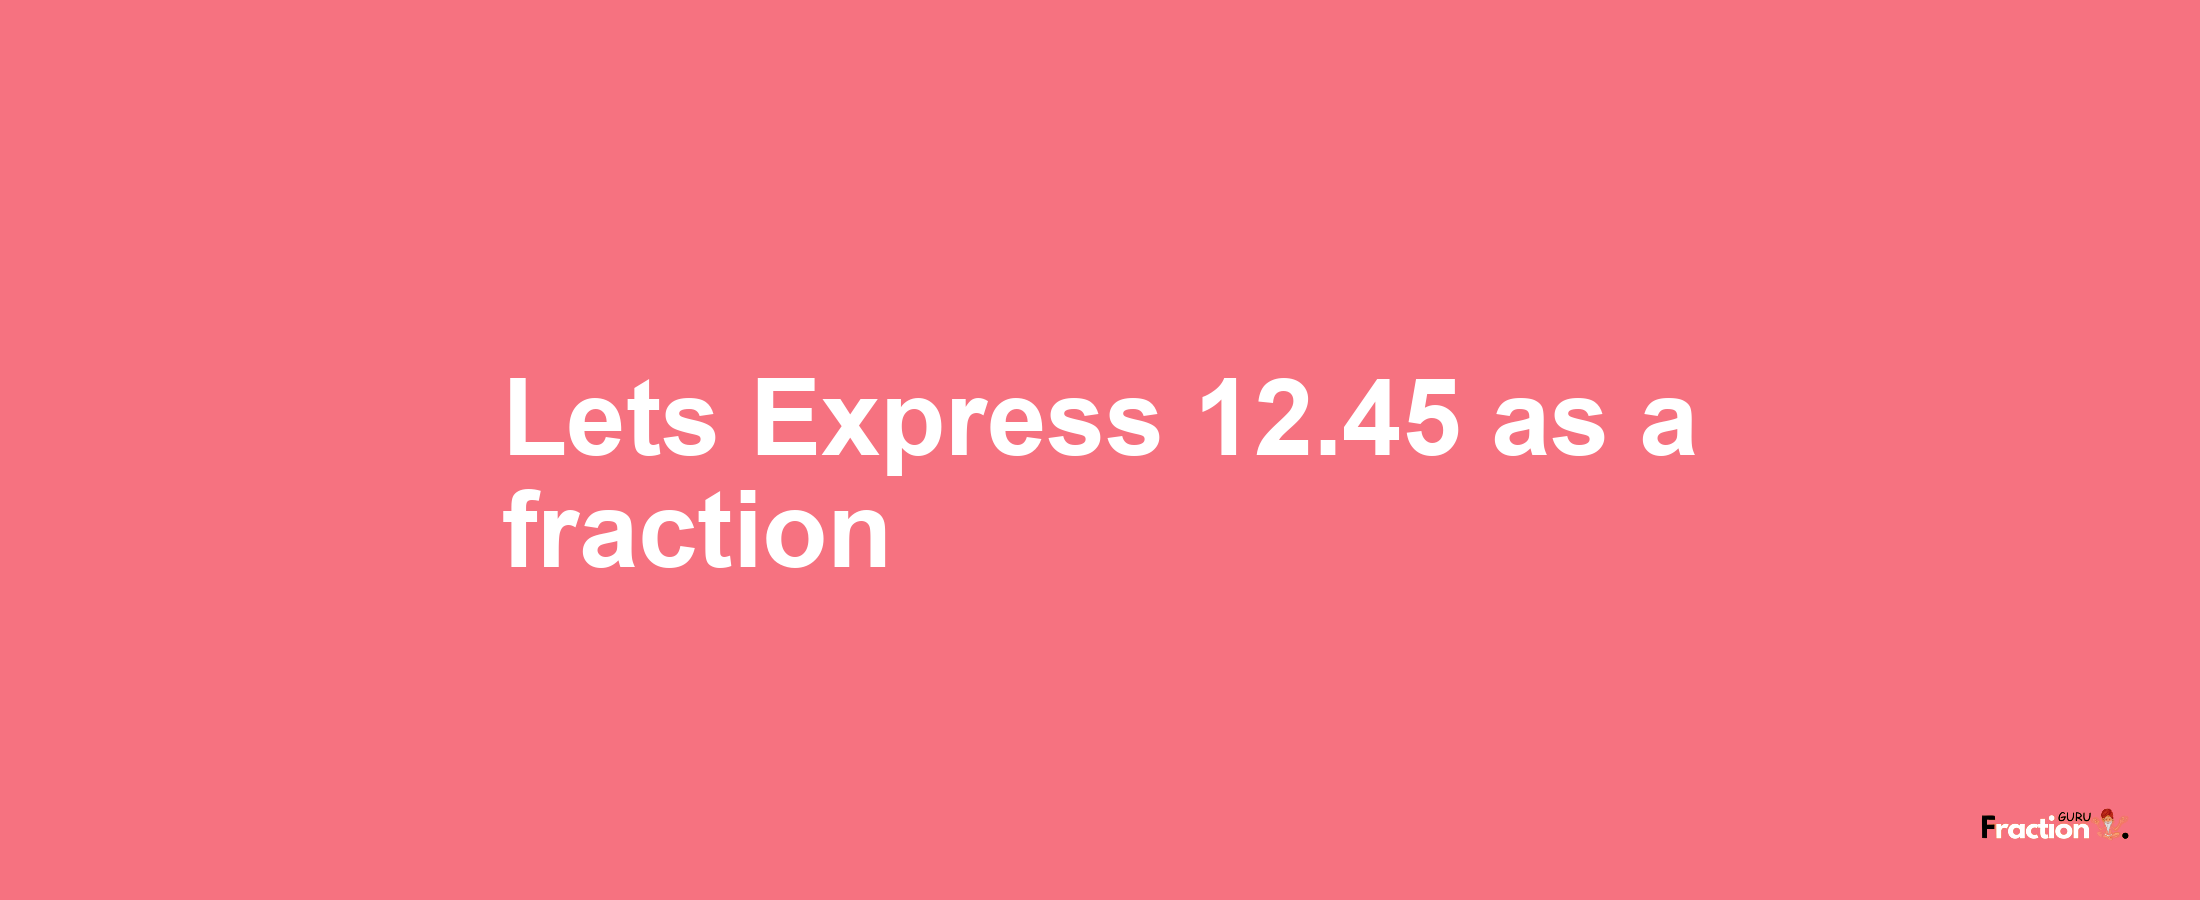 Lets Express 12.45 as afraction